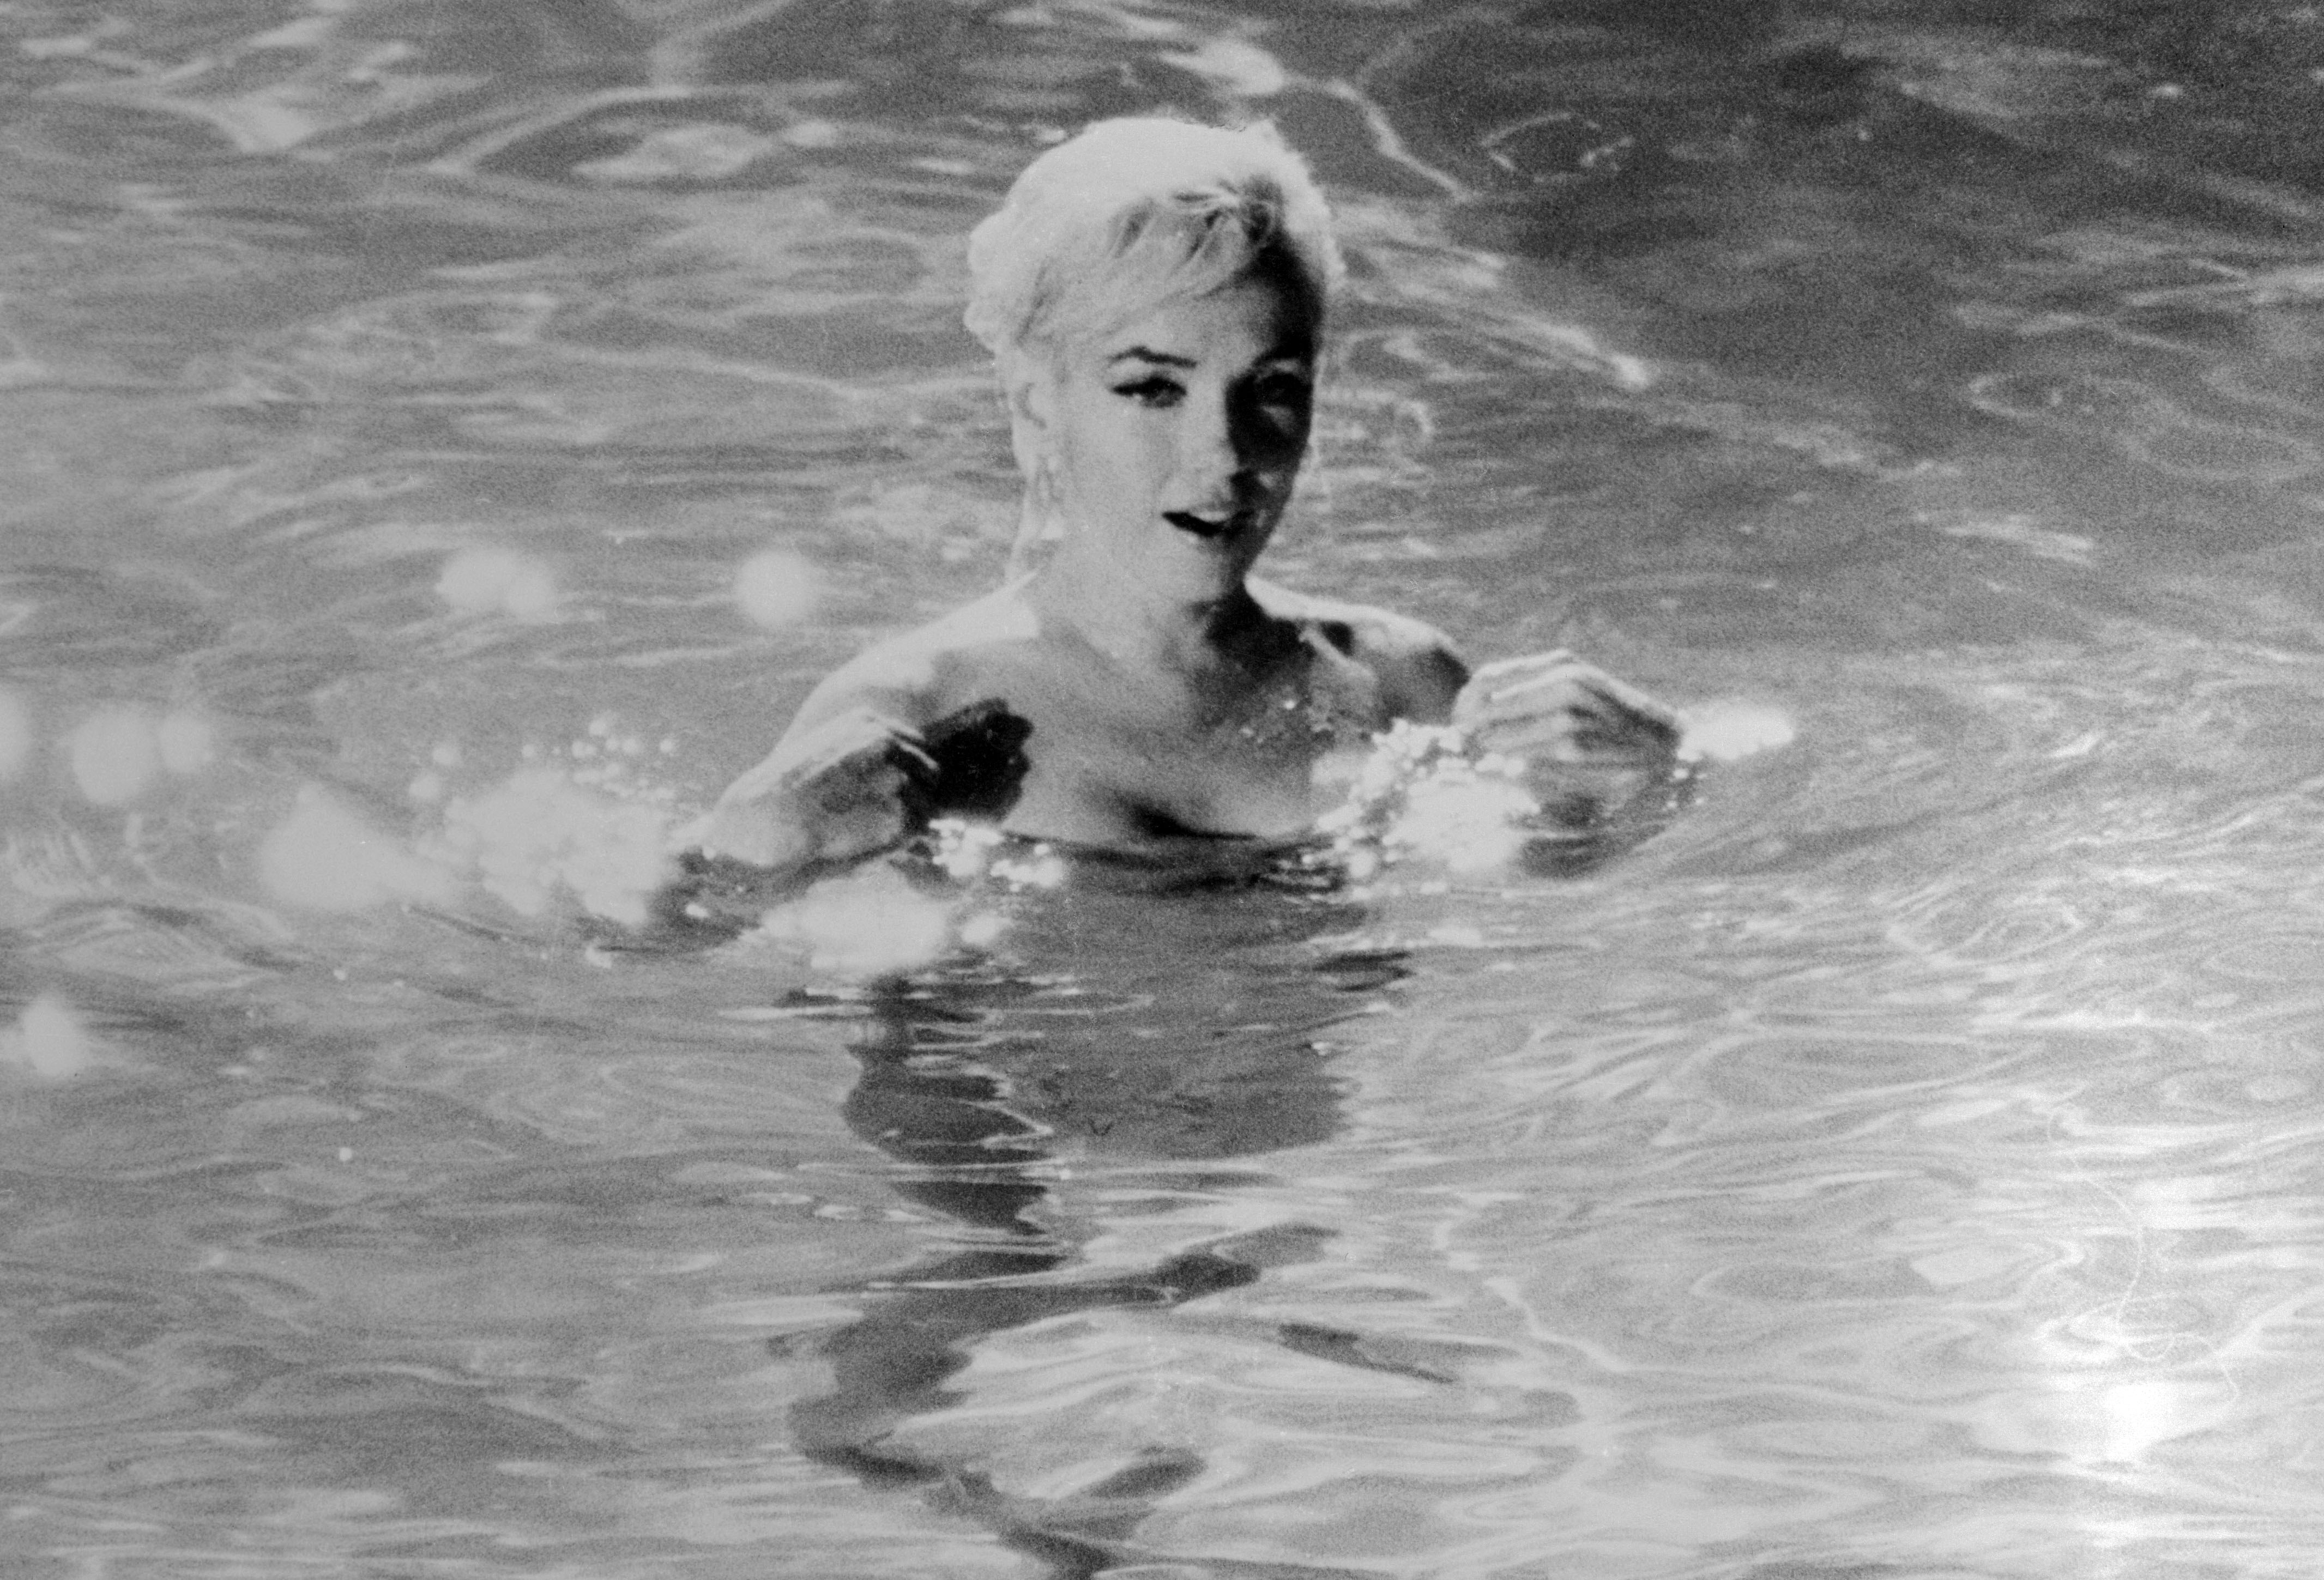 In this famous nude scene, her first for a film, Monroe takes a swim in Something's Got to Give, which was never completed because of Monroe's untimely death at the age of 36.